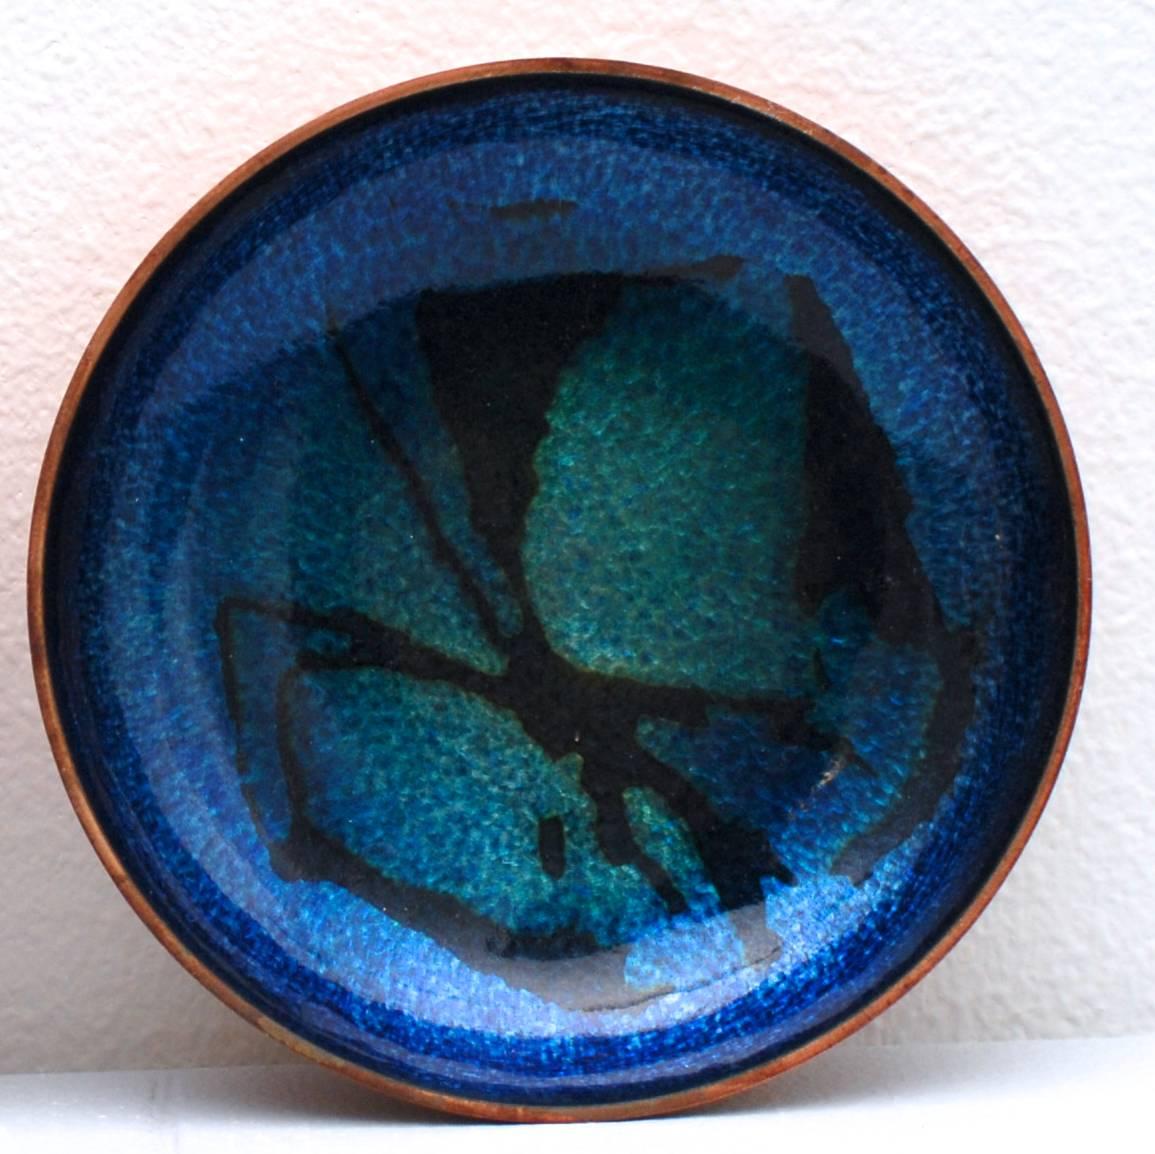 Scandinavian modern enamel copper inlay silver dish by Johanssen, Norway, 1960.
Exquisite pair of delicate decorative mixed colors cobalt blue enamel copper dishes with silver sheets inlays enamel over glaze. Makers mark under base, crafted in